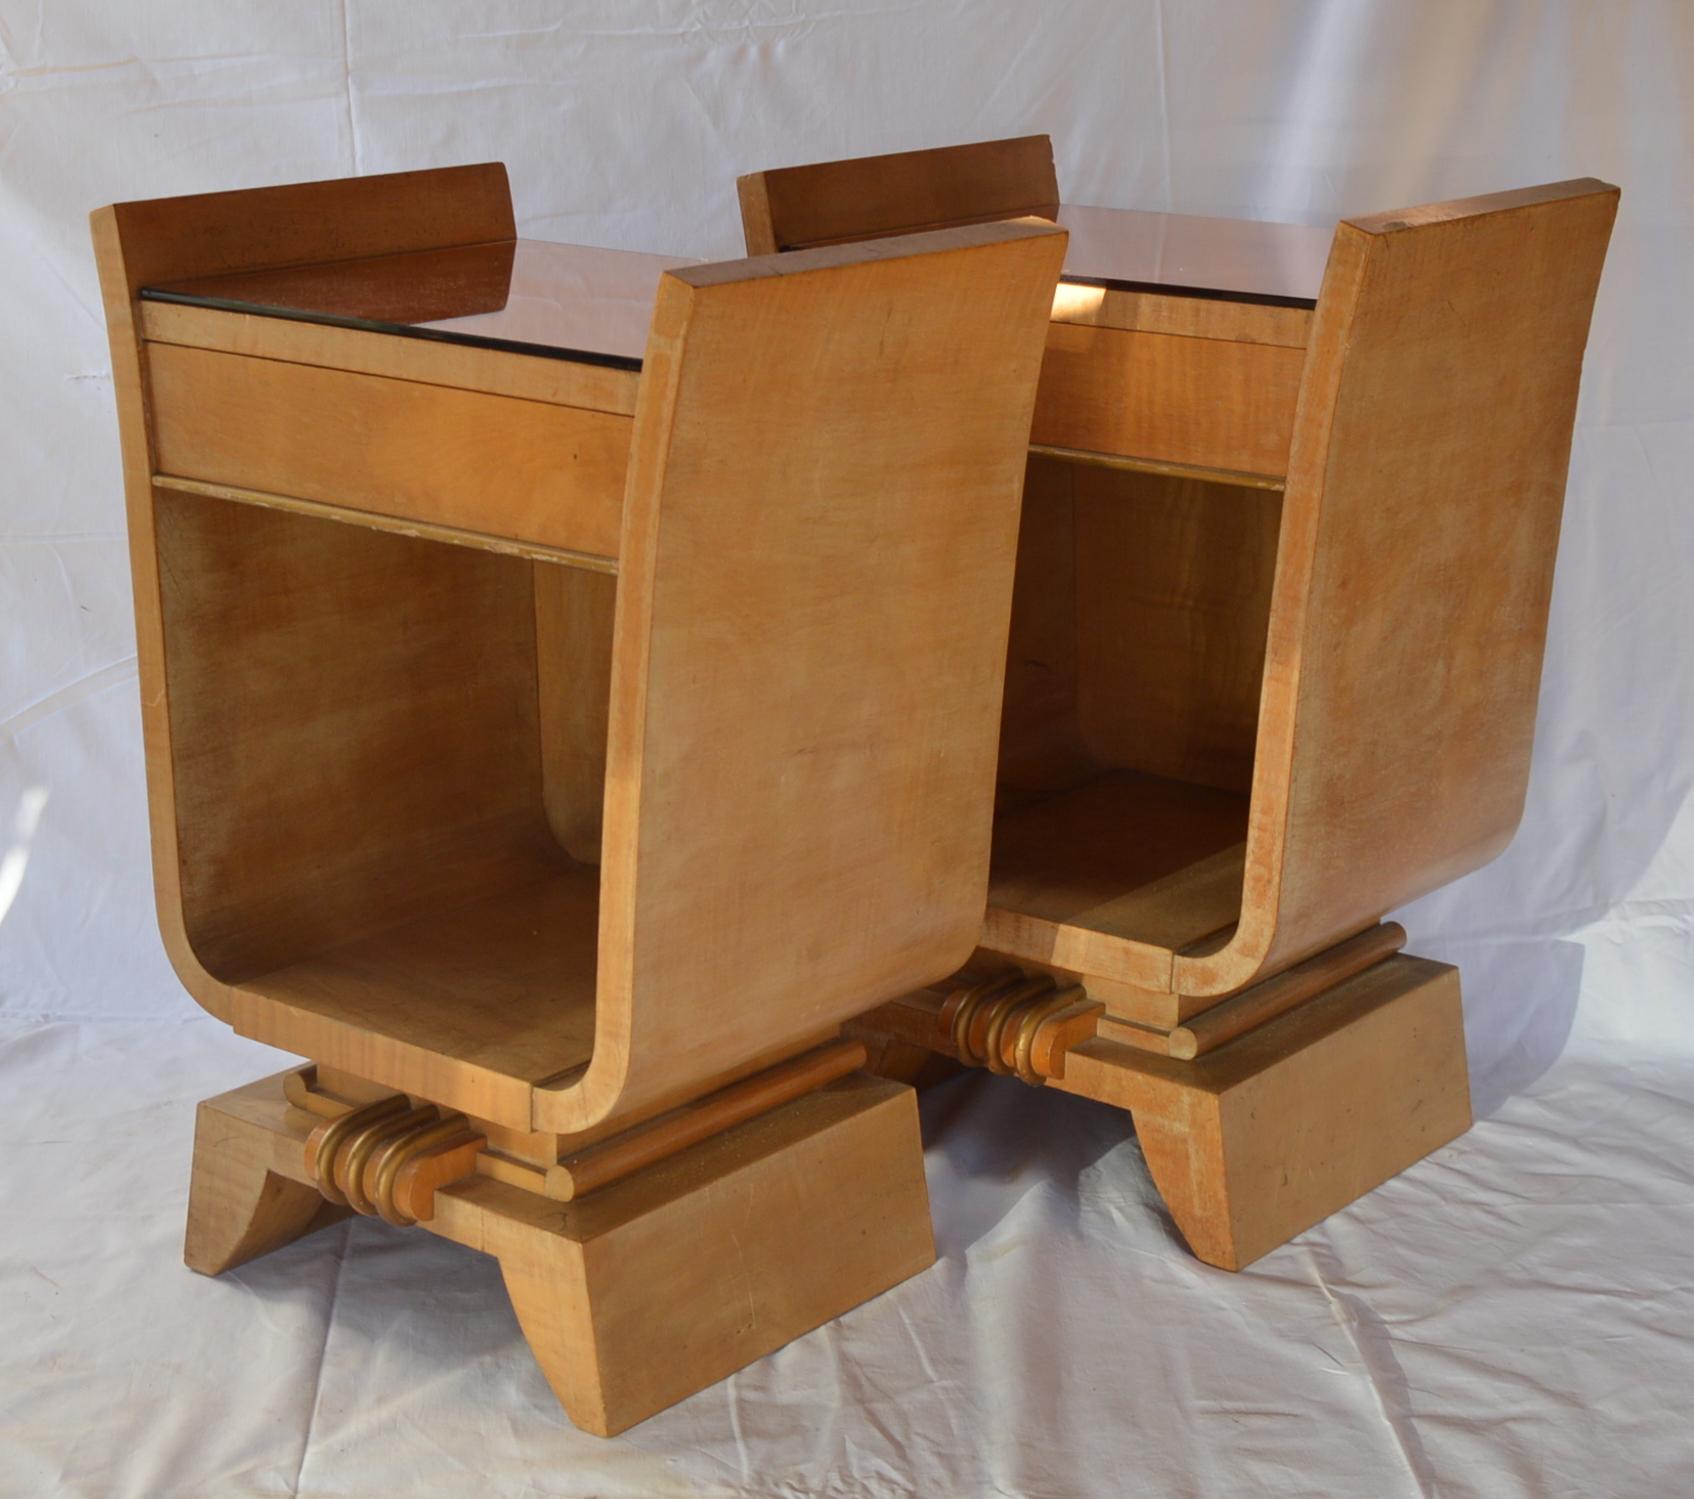 Glass Pair of French Art Deco Bedside Tables from the 1930s